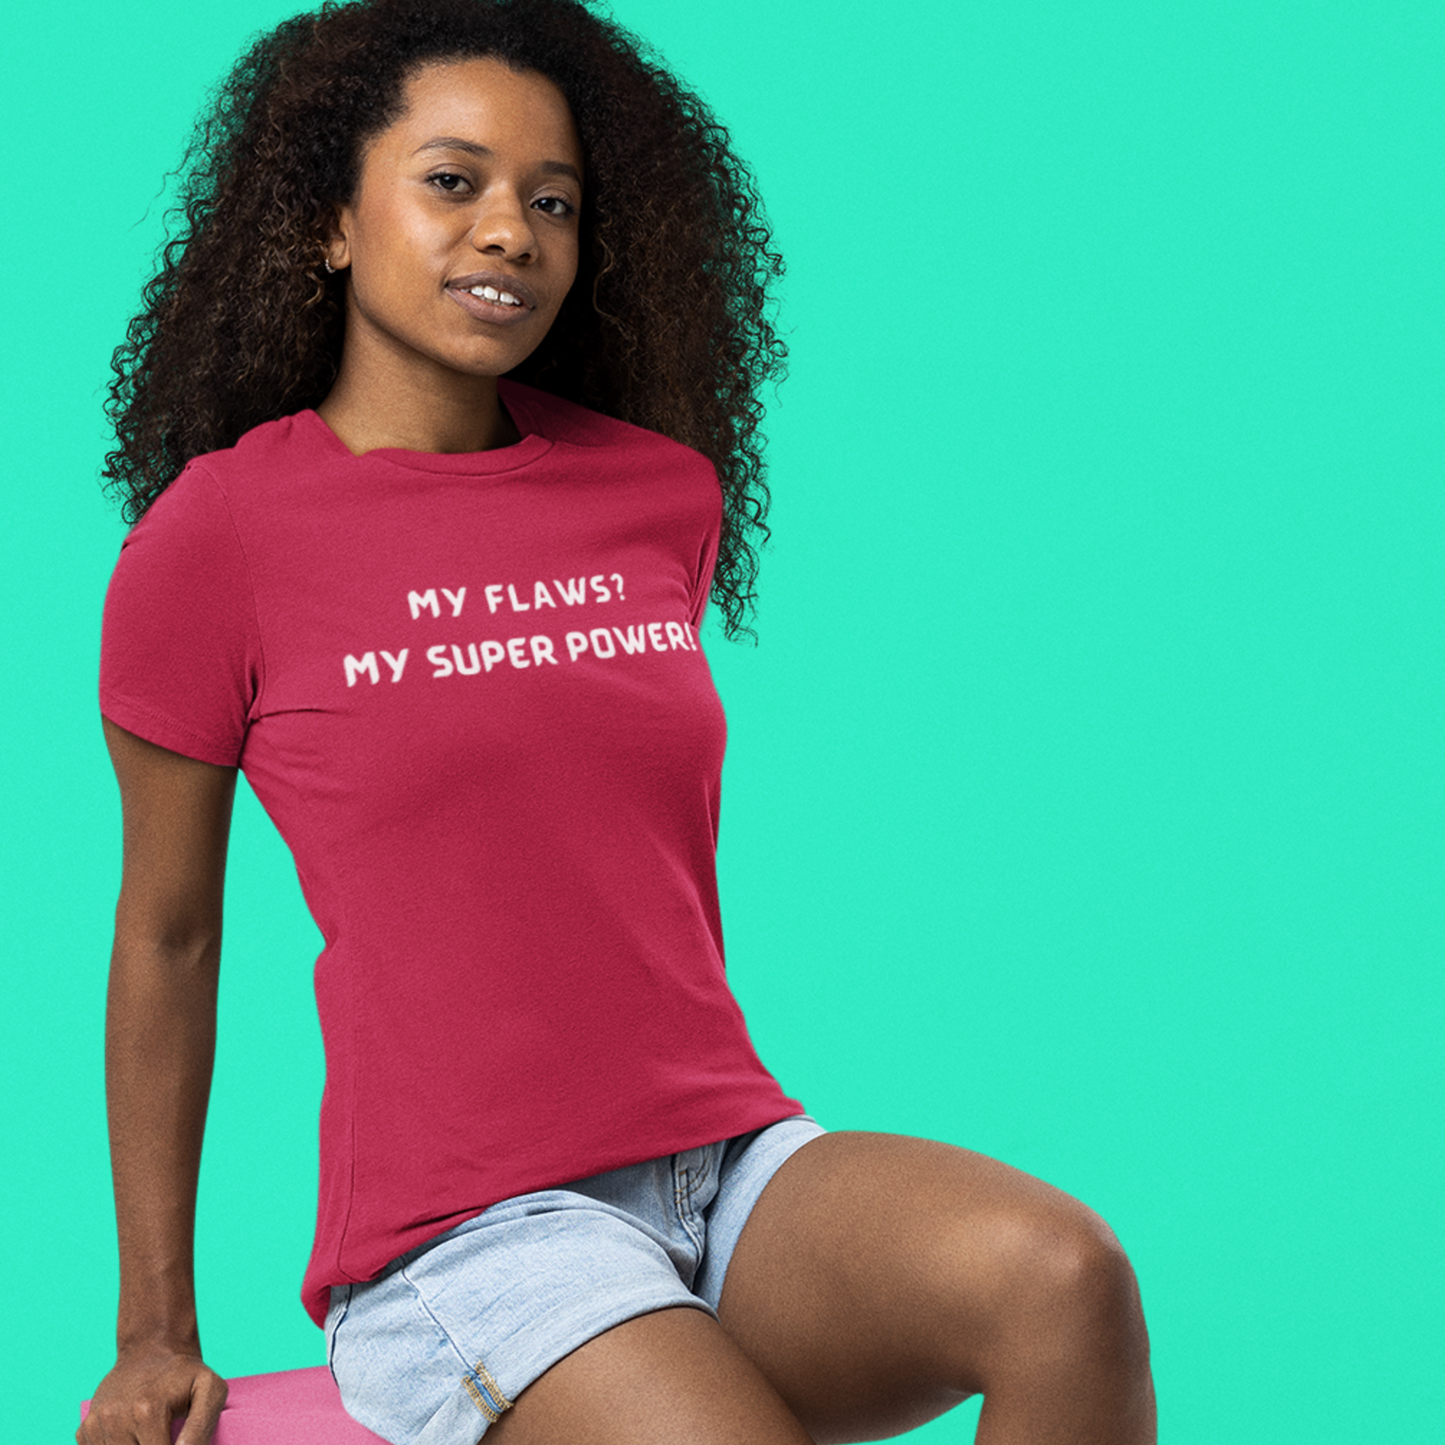 My flaws? My super power! unisex t shirt gift, tshirt with inspirational words